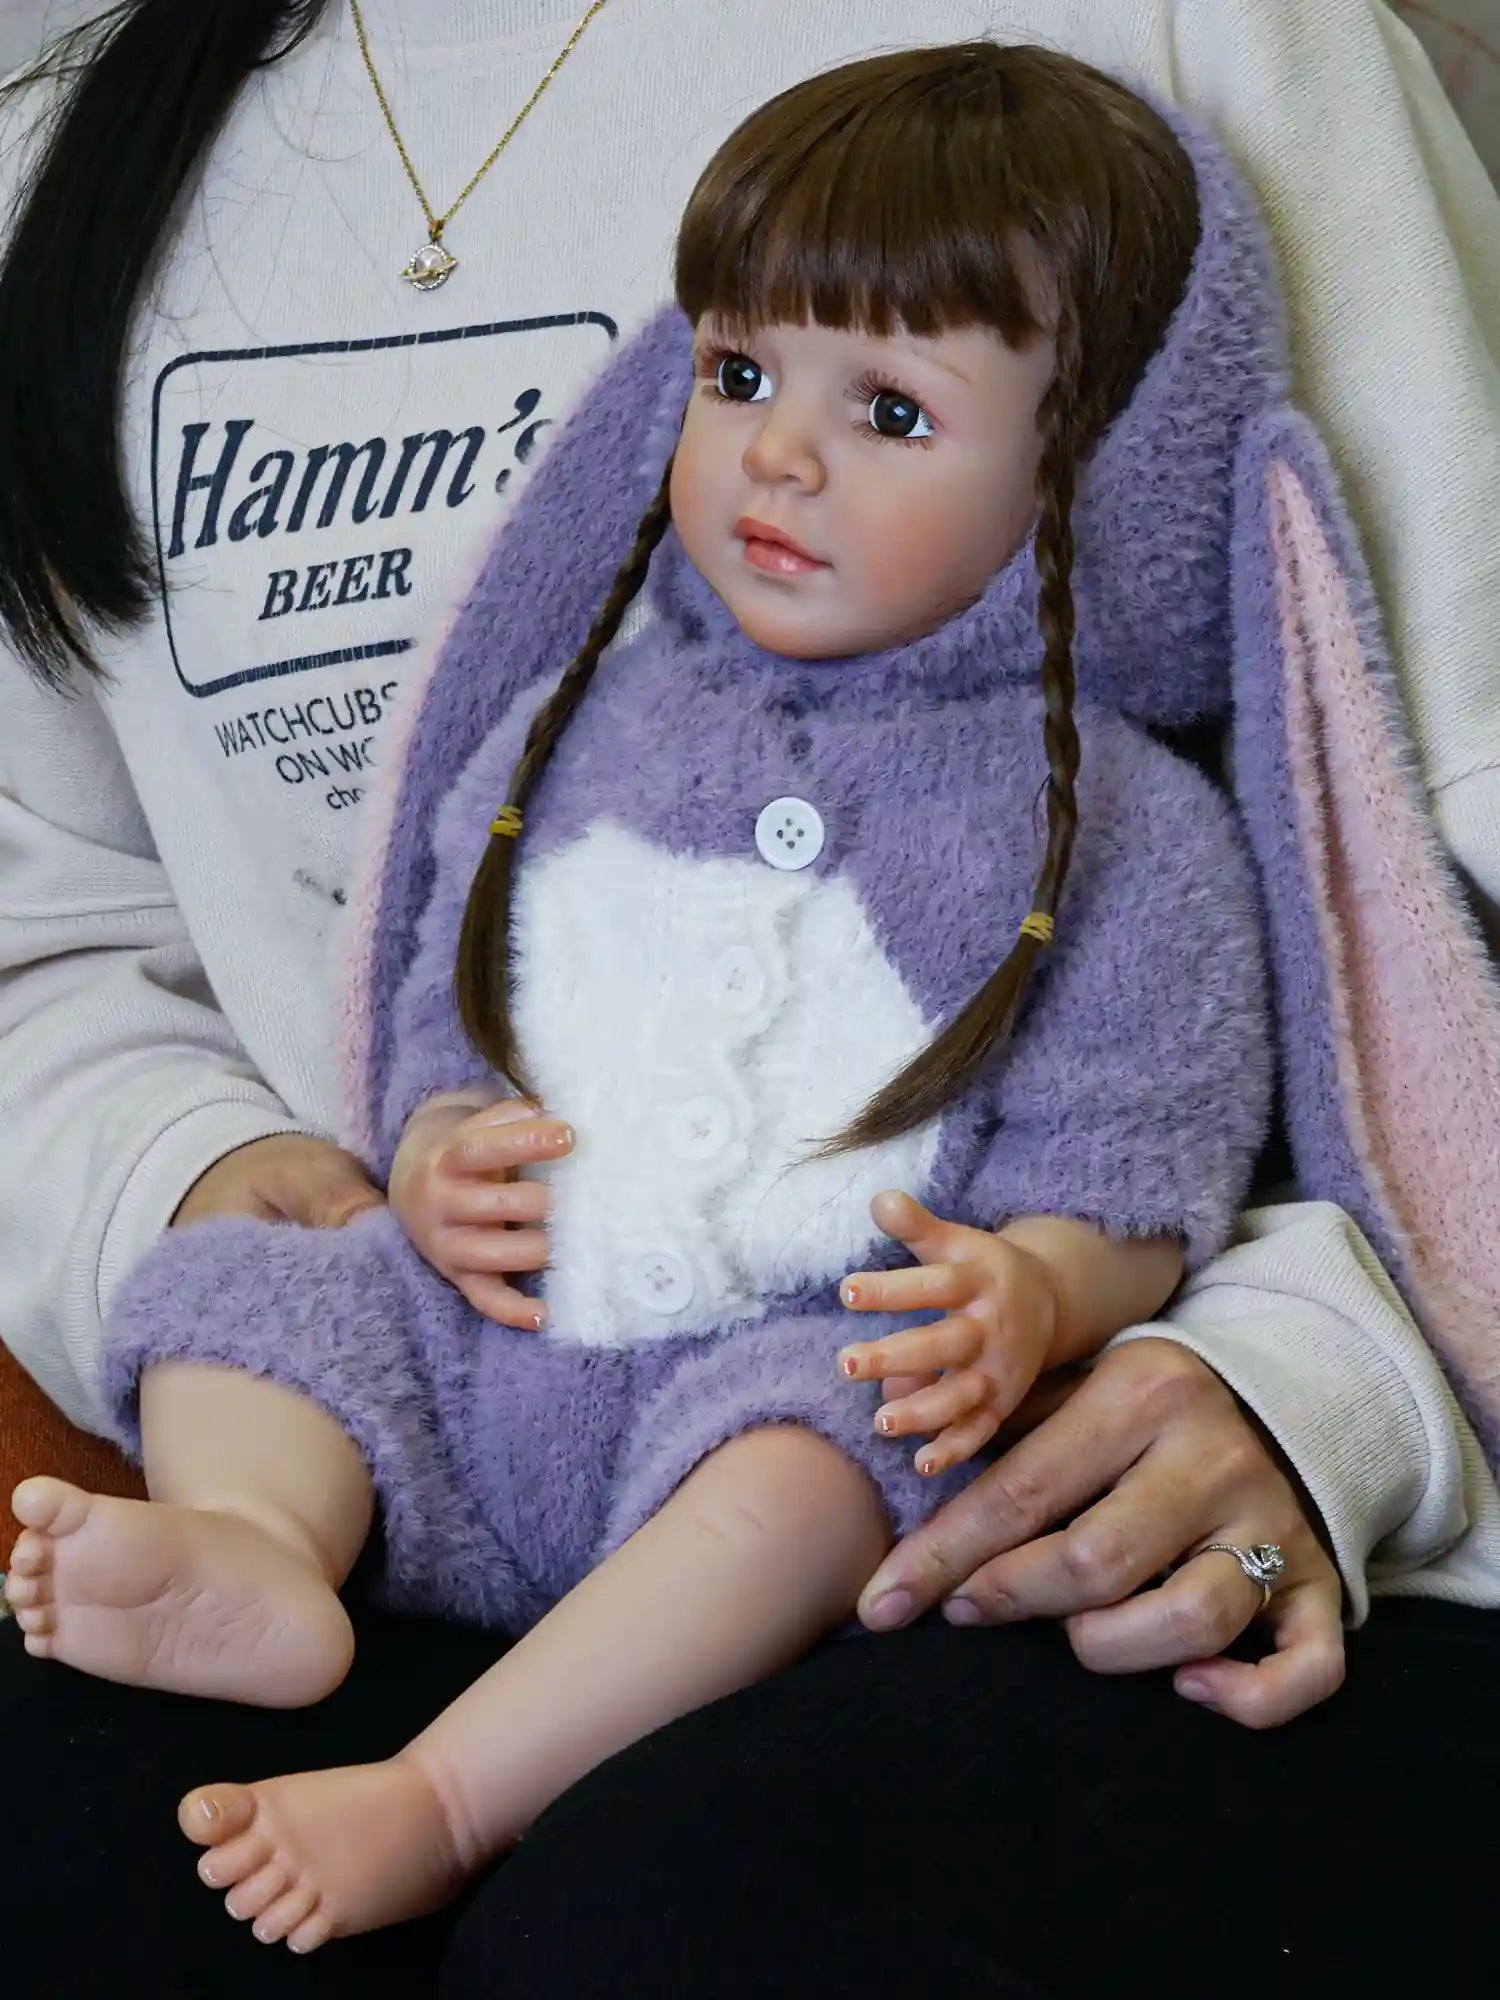 Toddler doll showcasing detailed craftsmanship, with shiny brown hair styled in braids and dressed in a purple bunny onesie, positioned against a neutral-toned backdrop.